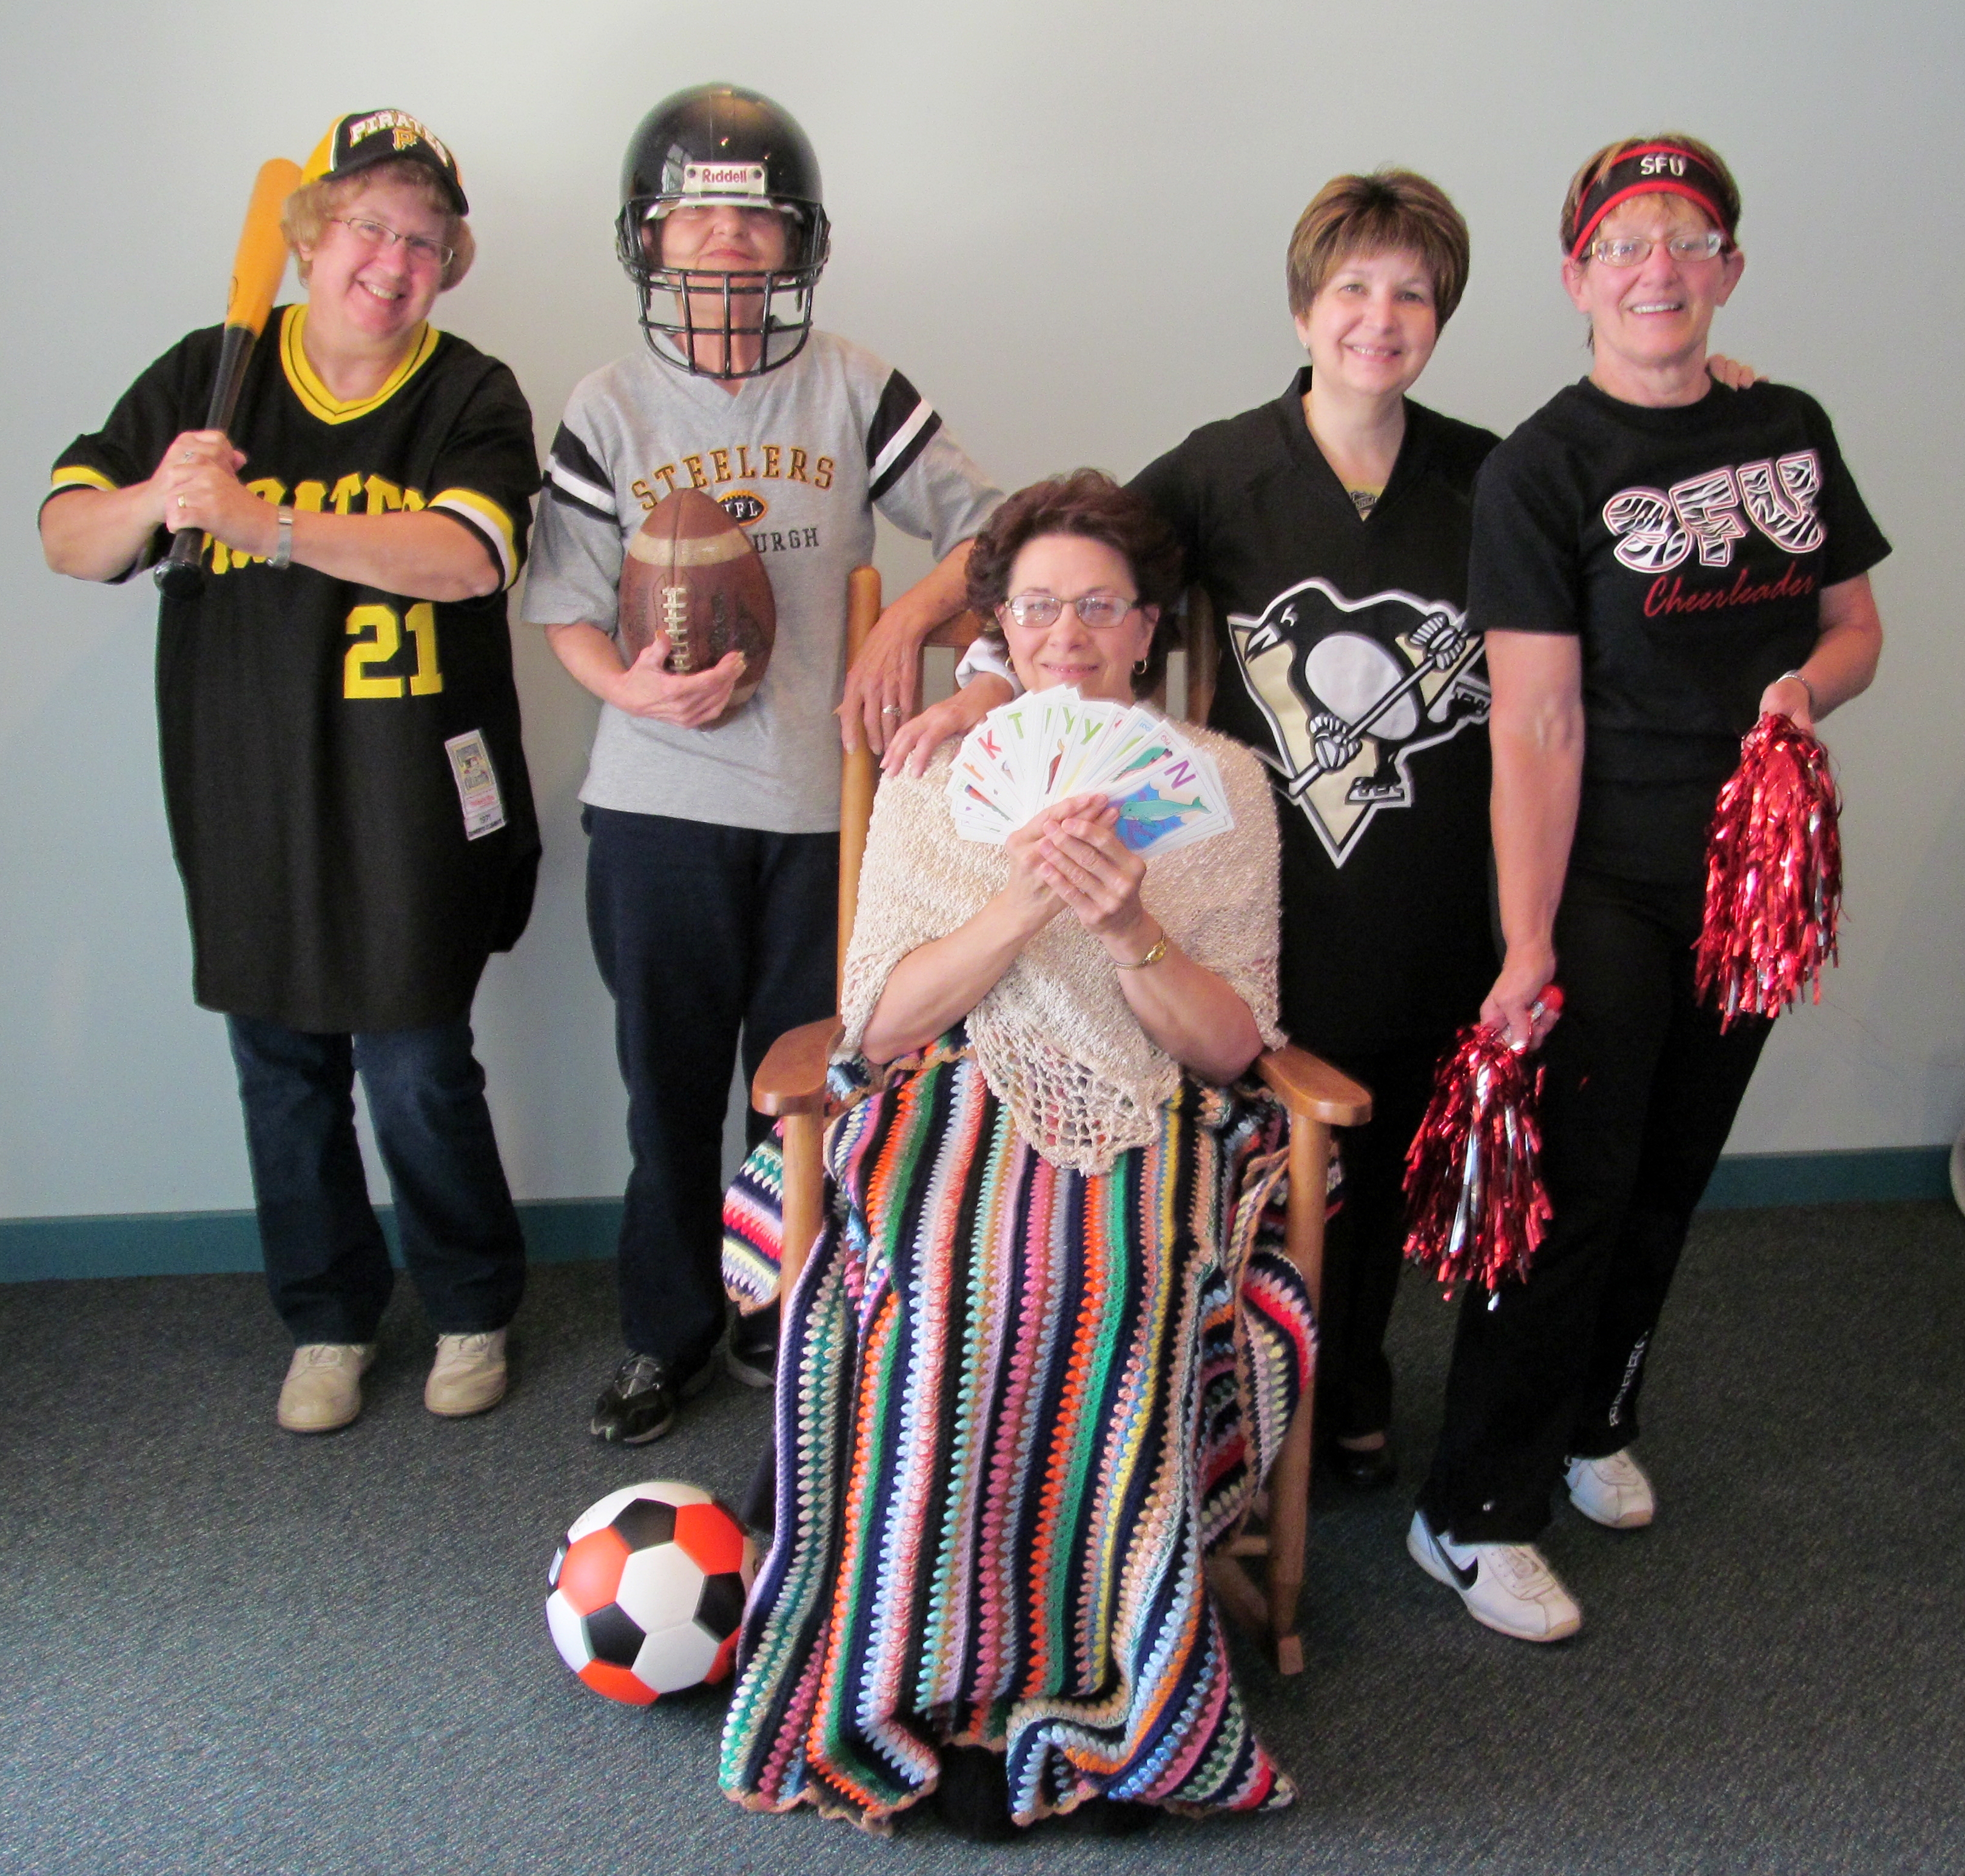 Dressing in accordance with the theme, “Game On,” are, from left, Karen Warfield, registered nurse and director of home health and hospice; Donna Neff, hospice volunteer; Janice Holt, hospice aide; Joyce Wisor, RN, hospice quality manager; and Marie McGovern, hospice medical secretary. (Provided Photo)